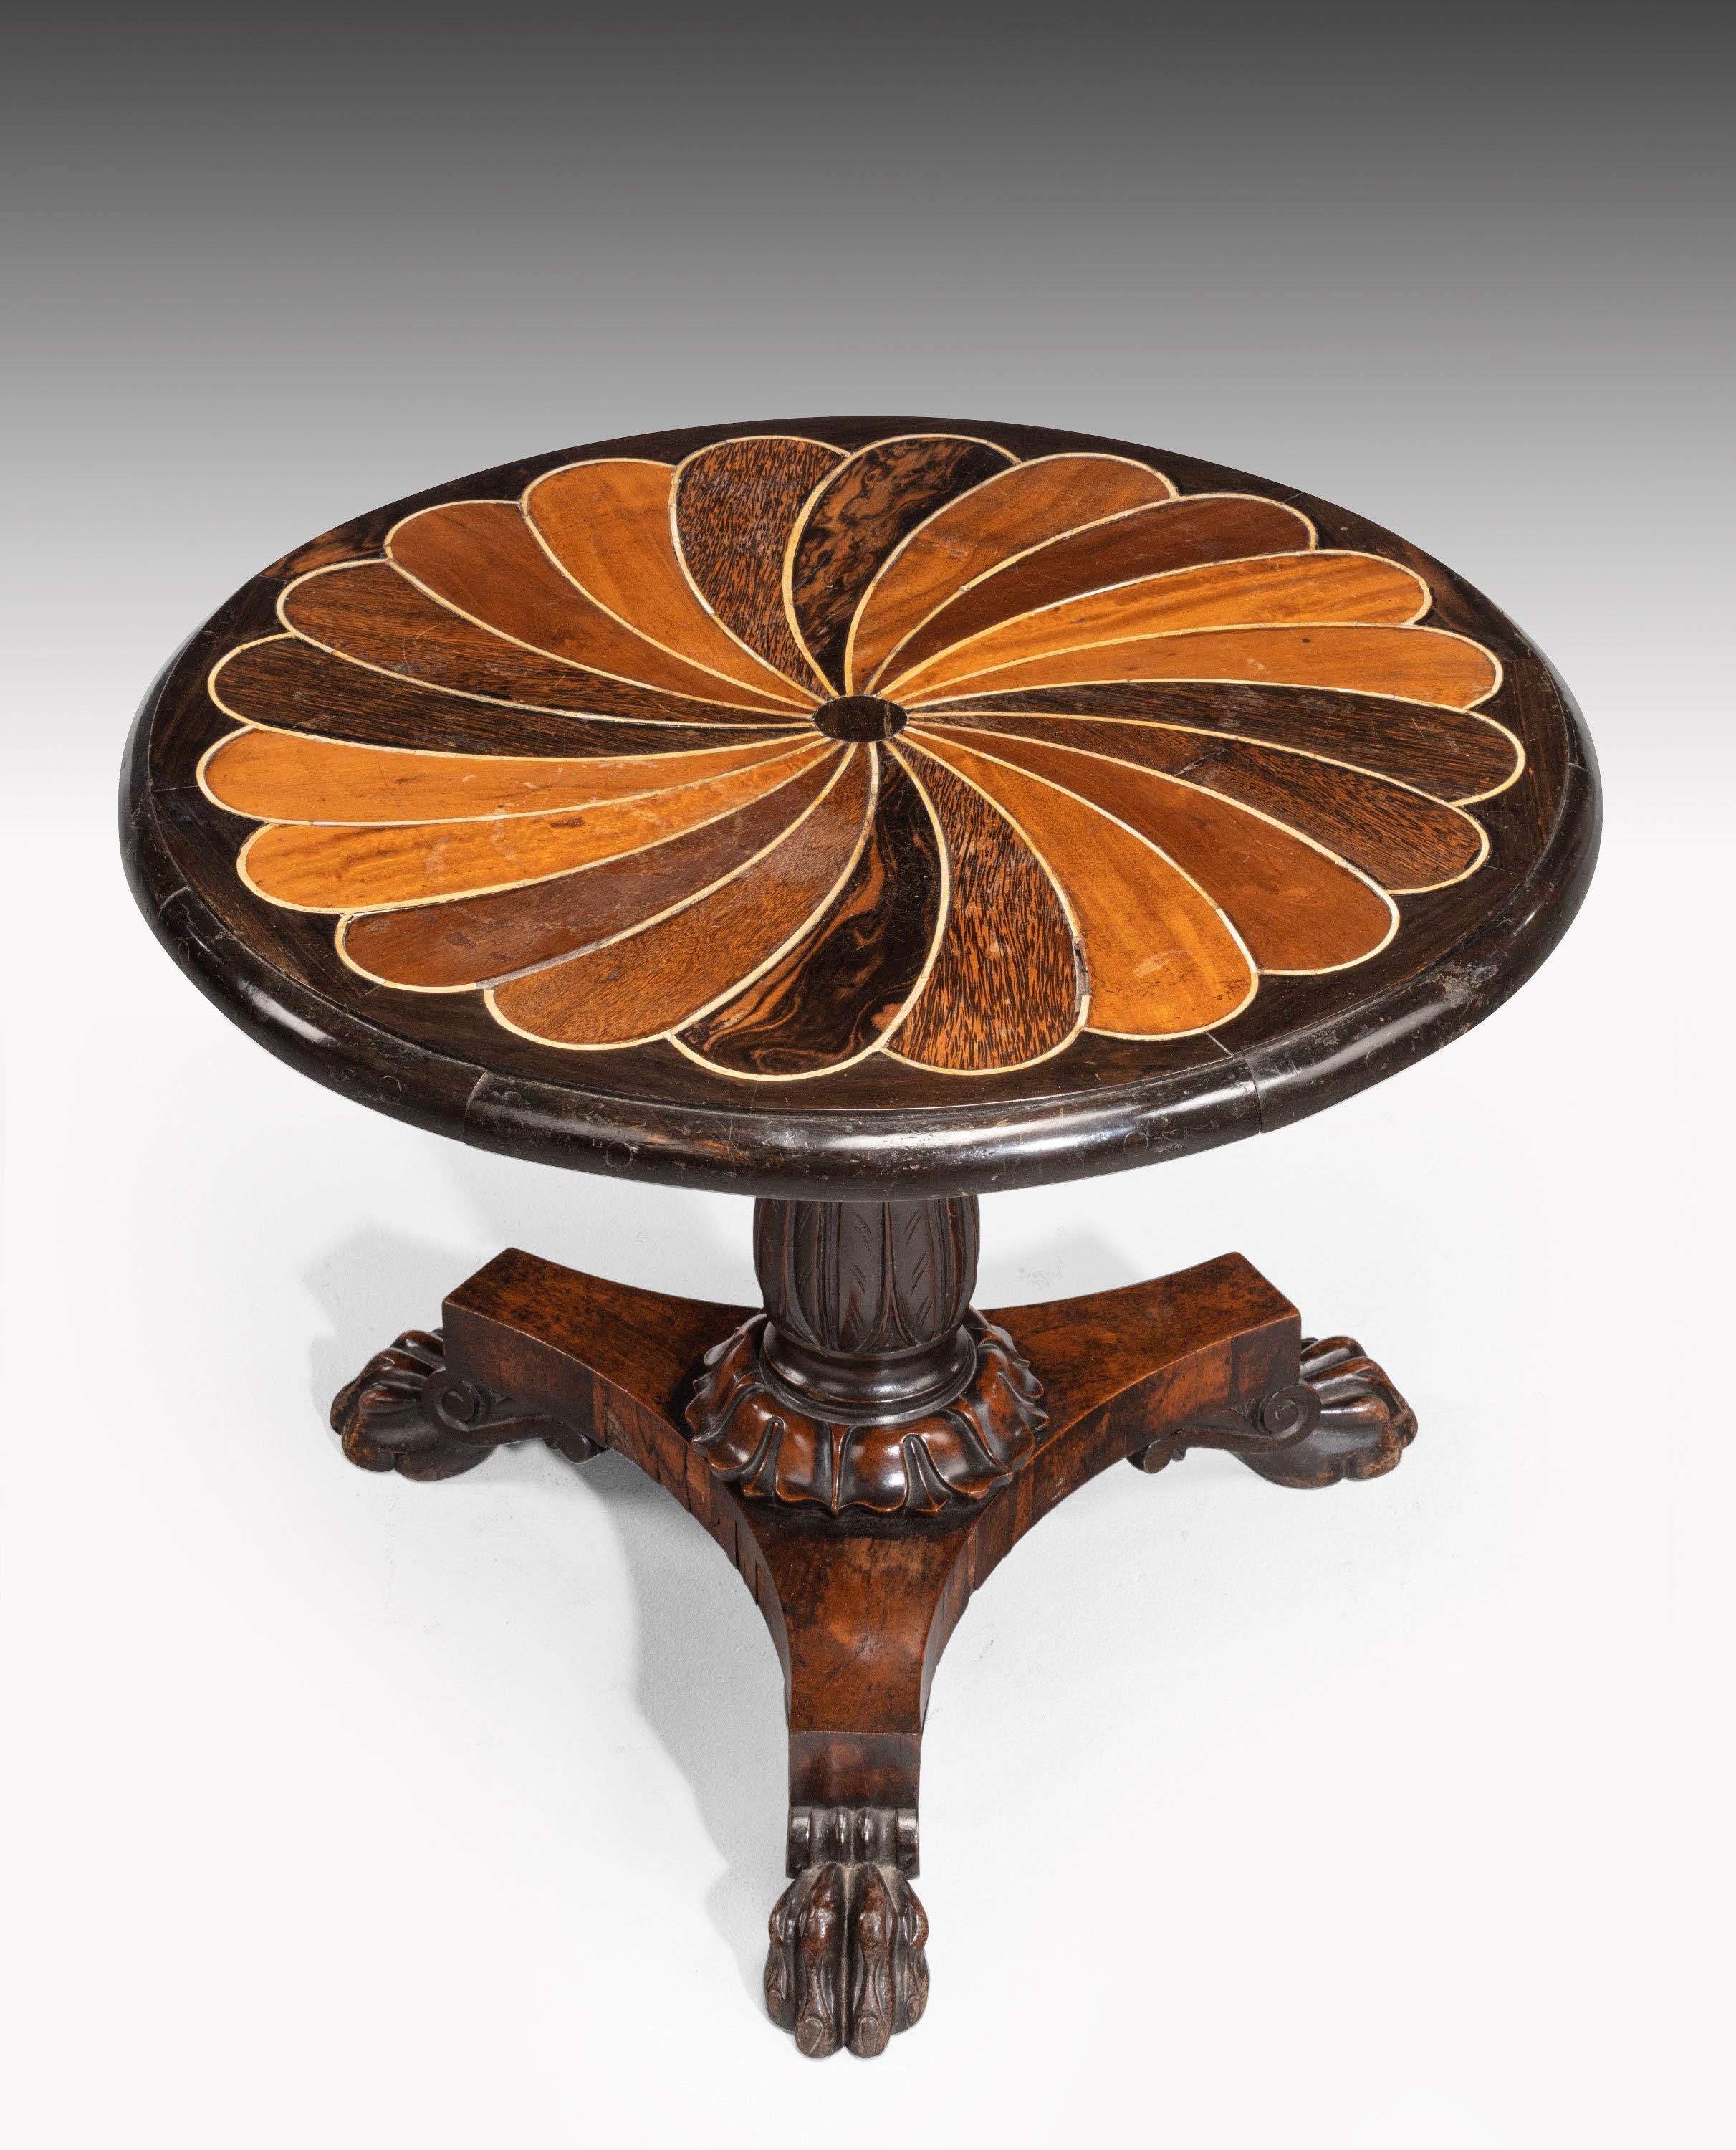 A 19th century Anglo-Portuguese inlaid table. With exotic timbers in a swirled design. Platformed base with three very well carved feet. At some point reduced in height.
 